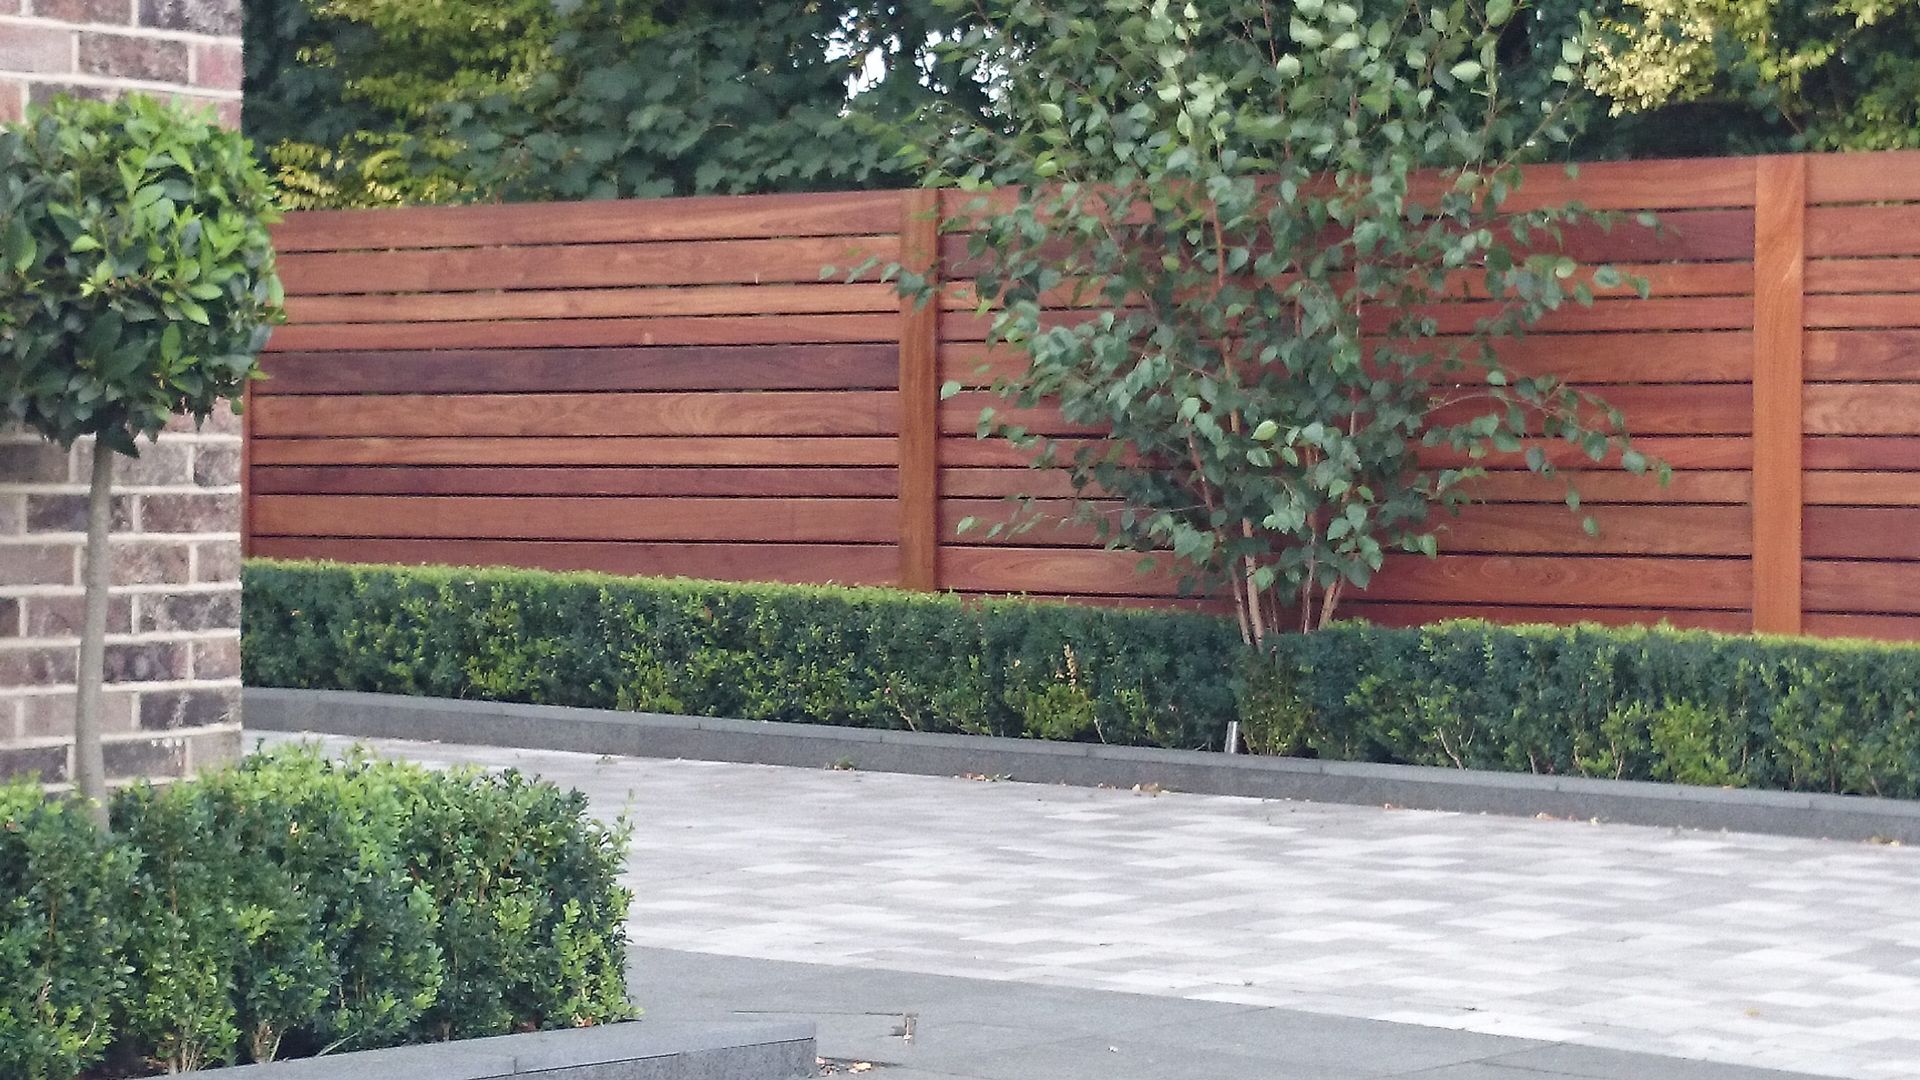 Contemporary screening , fencing & wall panels: Modern screening options in a high quality hardwood , Paul Newman Landscapes Paul Newman Landscapes Moderner Garten